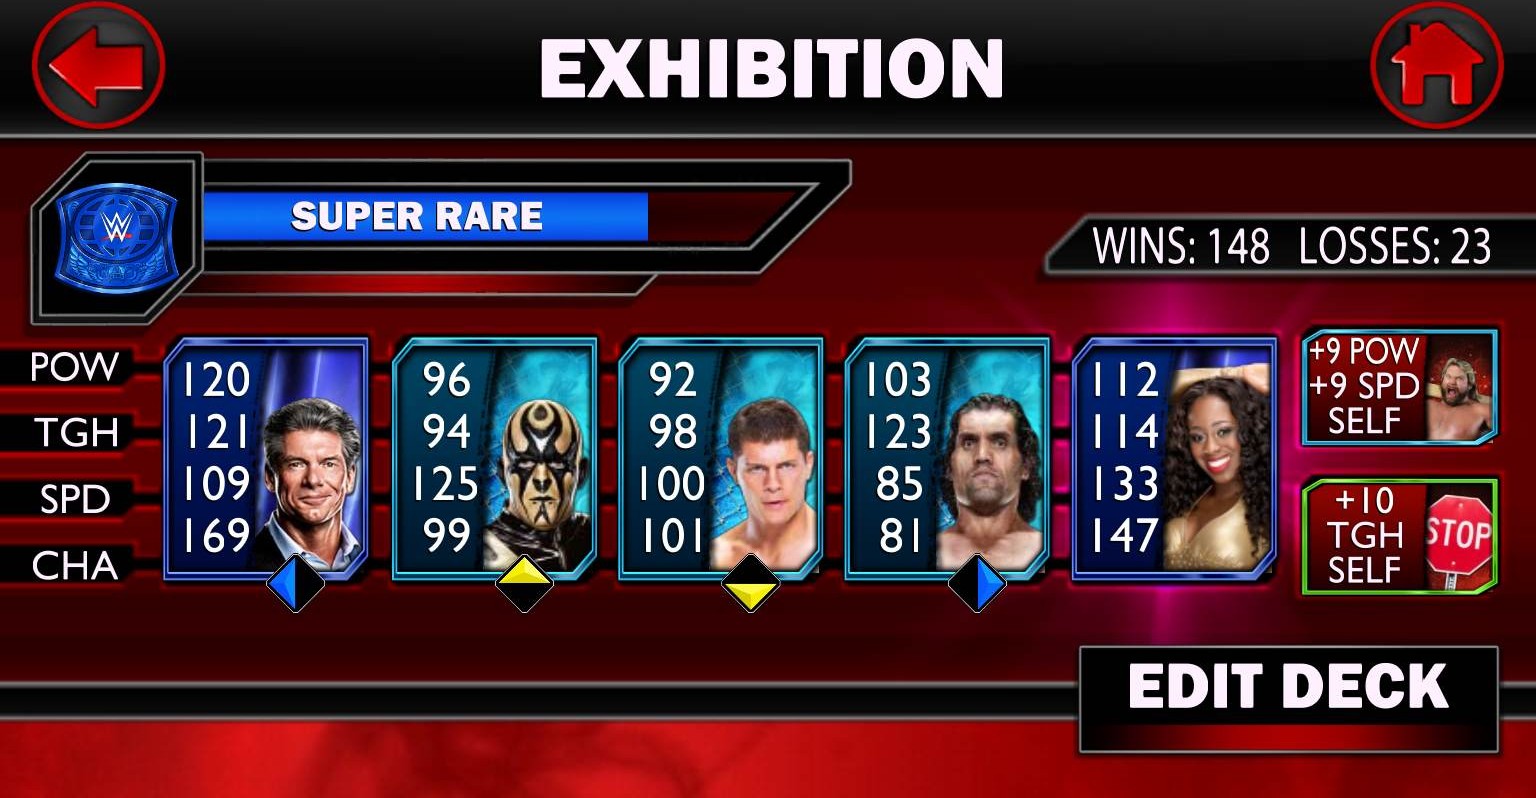 WWE SuperCard Review: A Fun, Addictive Mobile Experience That Needs A Bit of Fine-Tuning